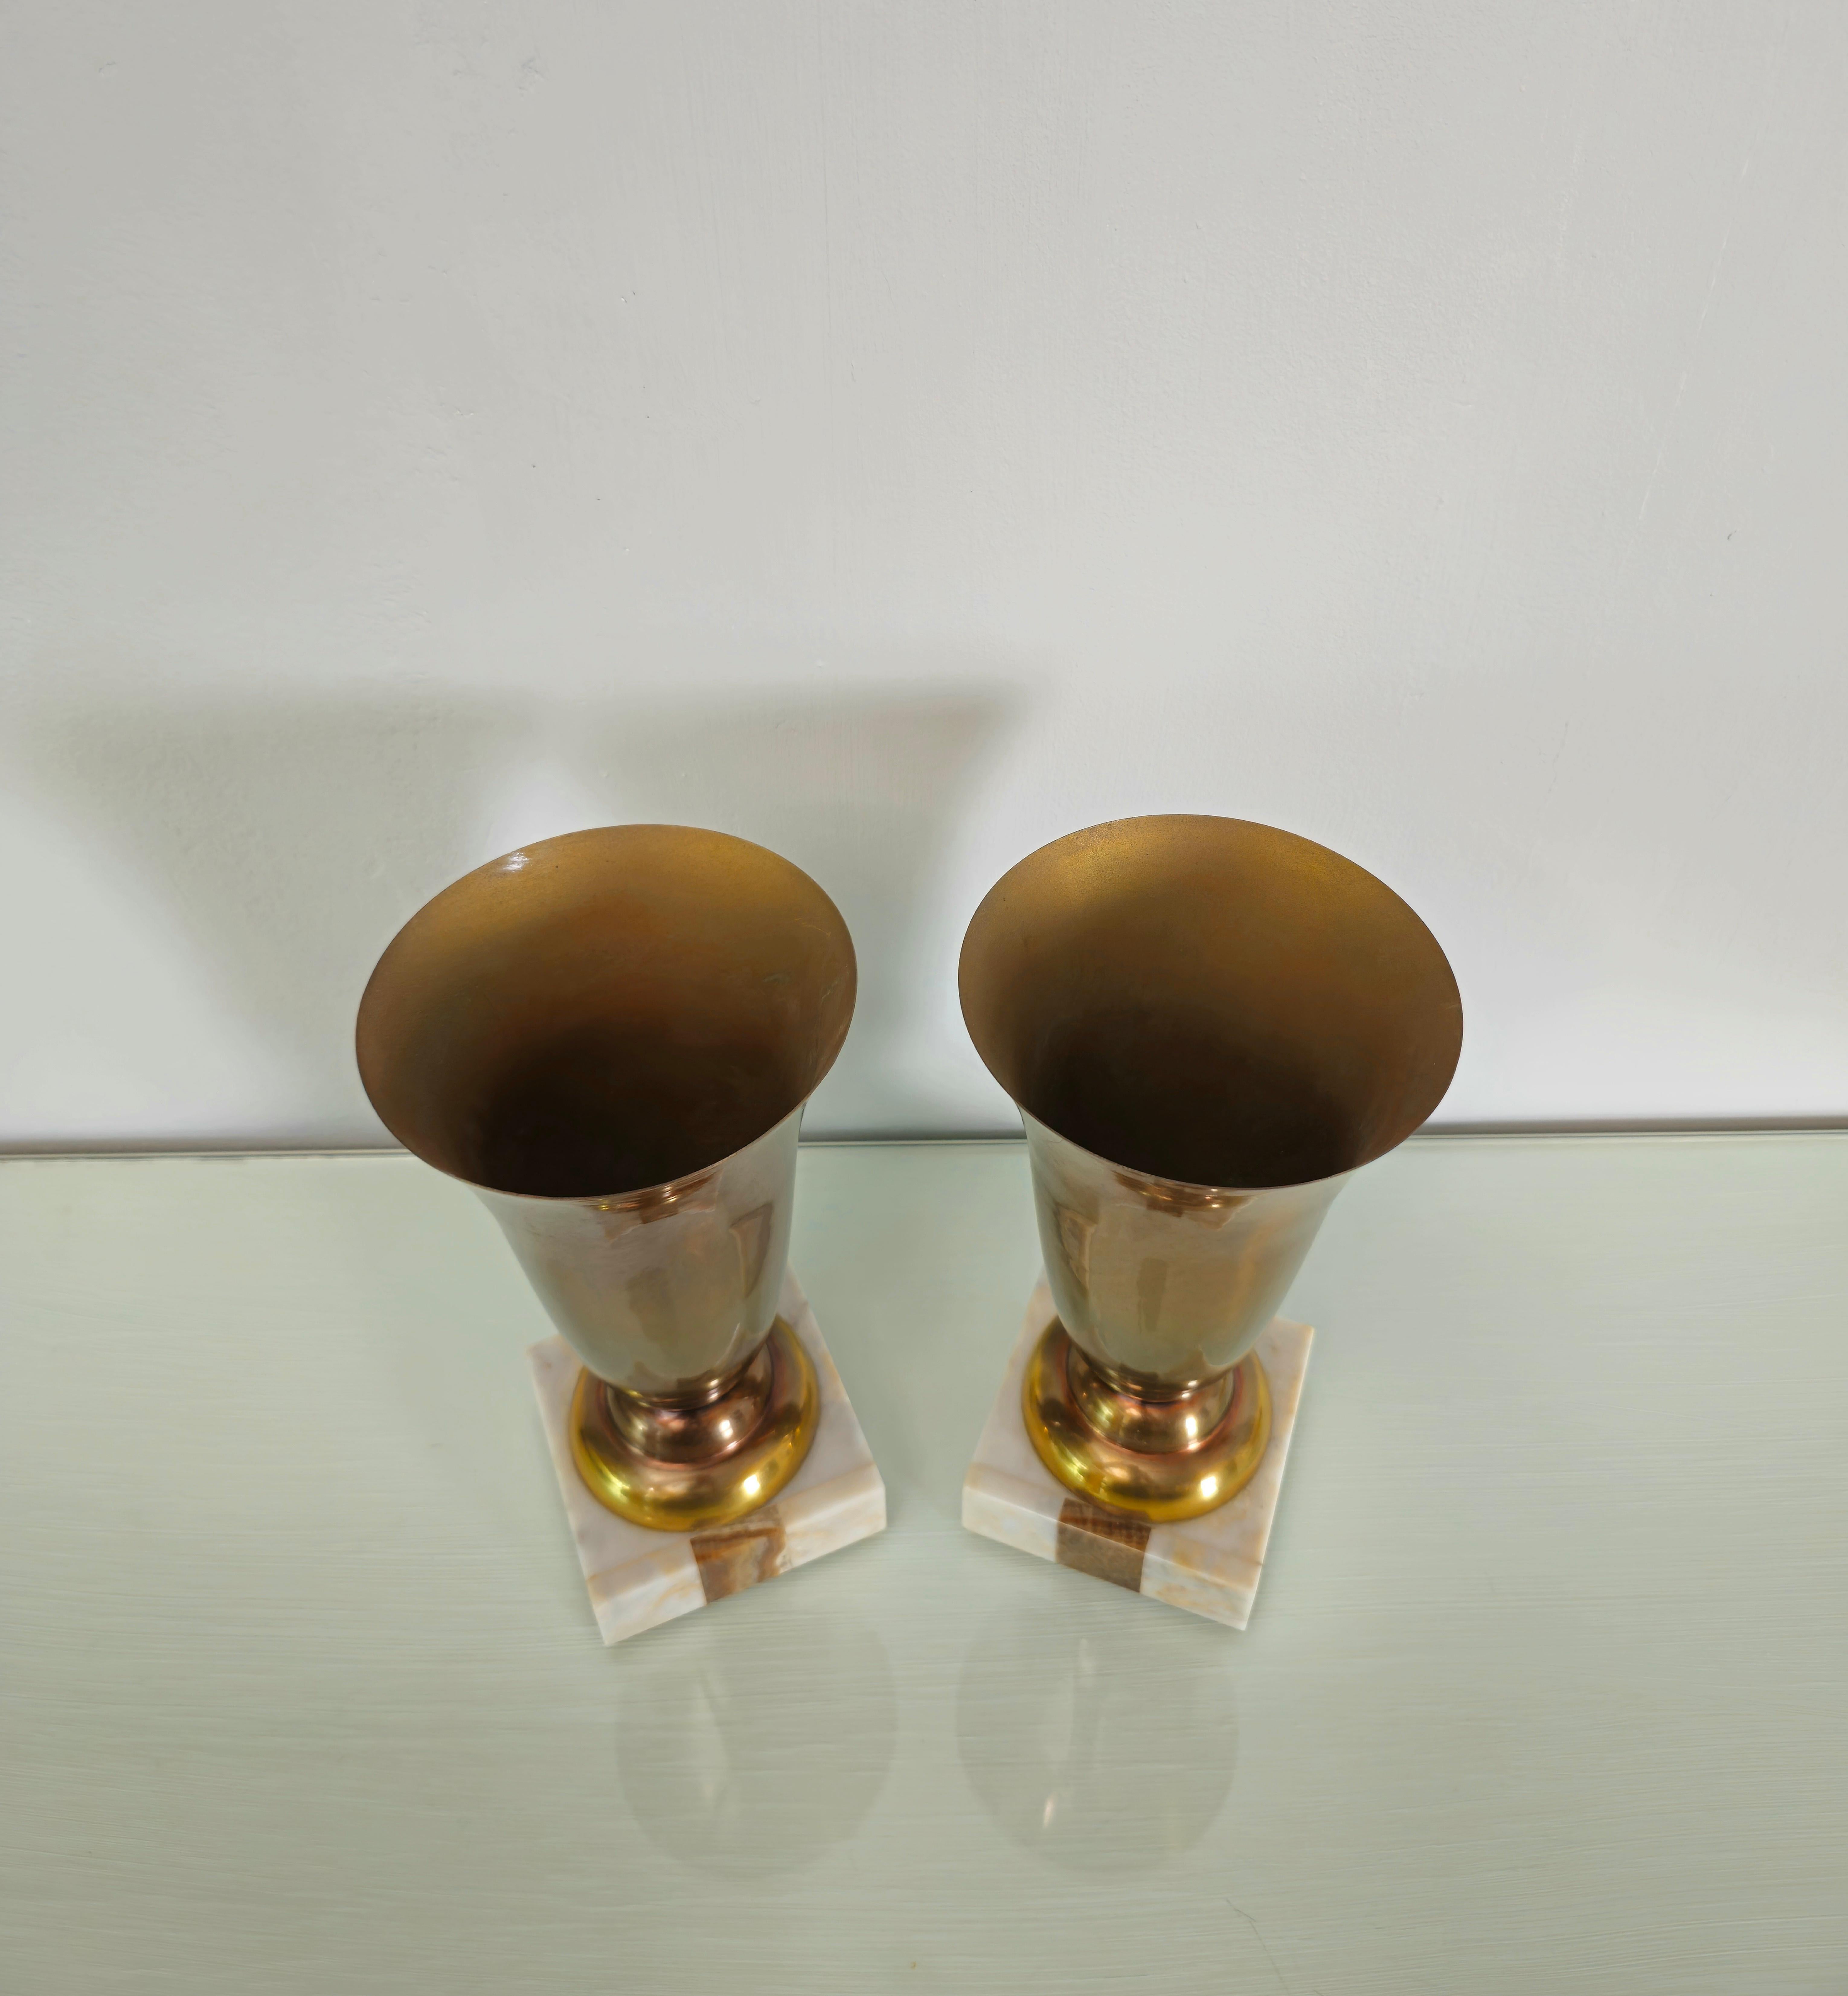 Decorative Objects Vases Aluminum Marble Midcentury Modern Italy 1960s Set of 2 For Sale 2